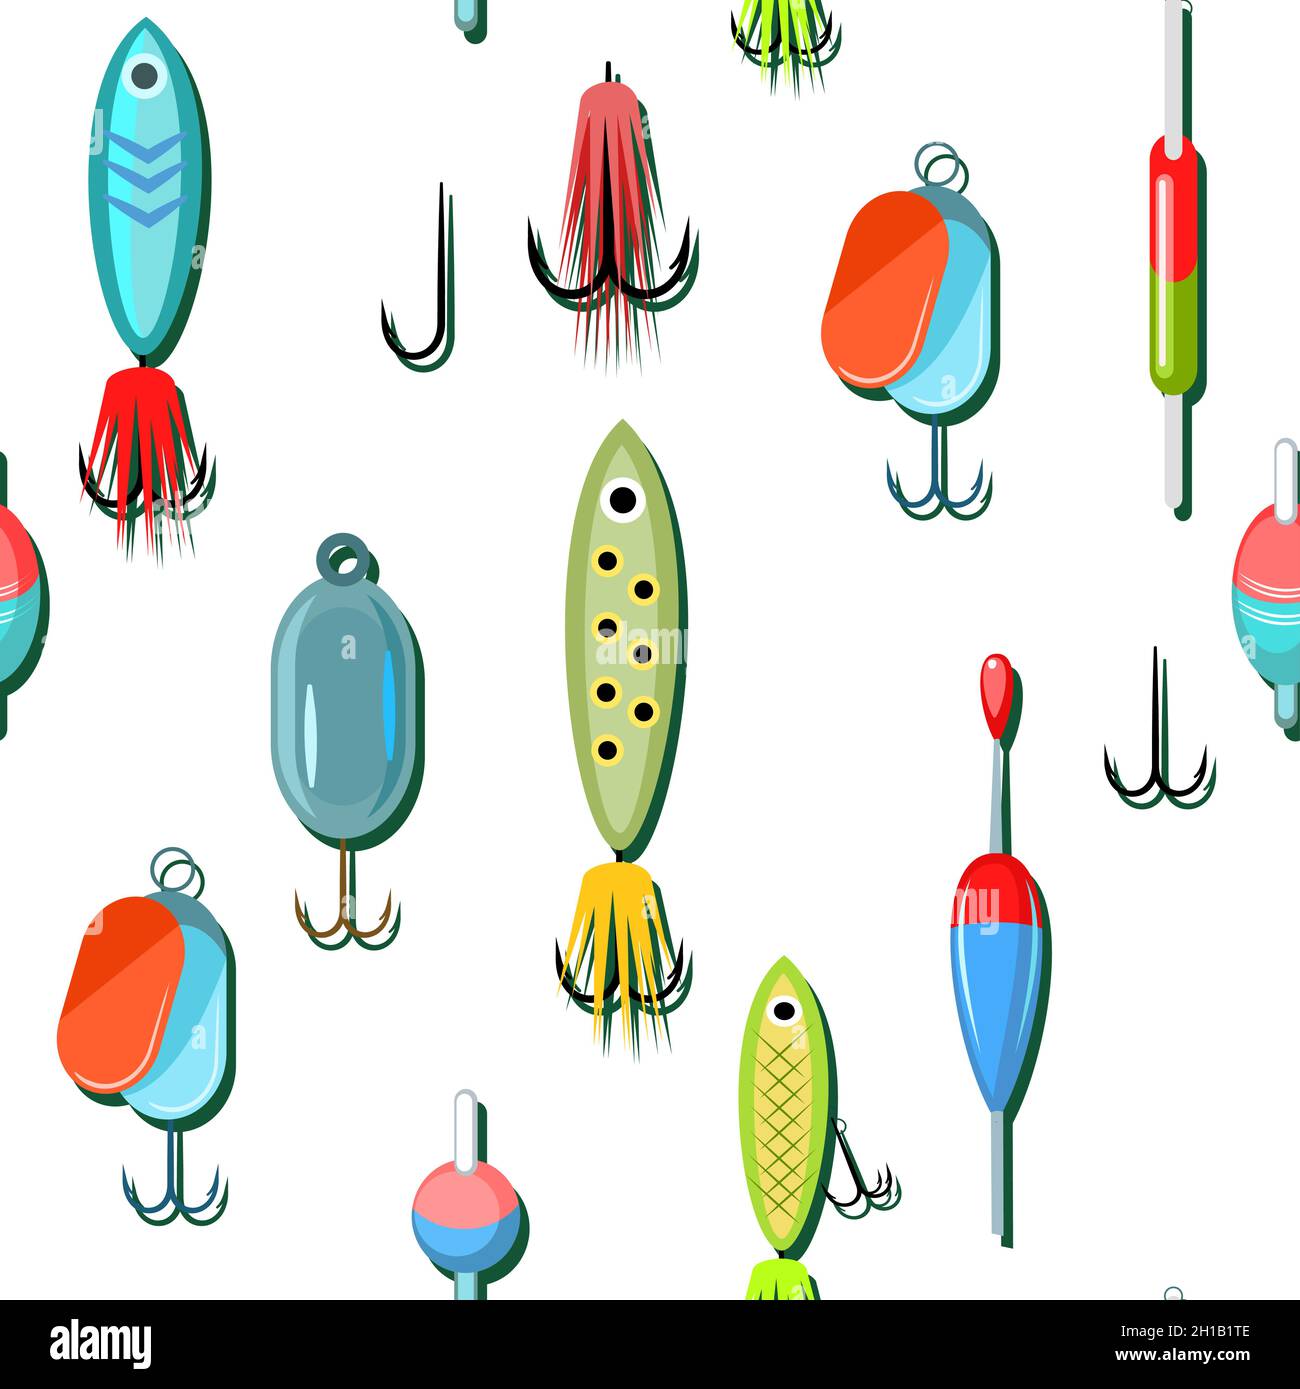 https://c8.alamy.com/comp/2H1B1TE/fishing-lures-and-wobblers-equipment-and-accessories-for-recreation-and-hunting-on-reservoirs-sale-of-fishing-rods-and-clothing-seamless-pattern-i-2H1B1TE.jpg